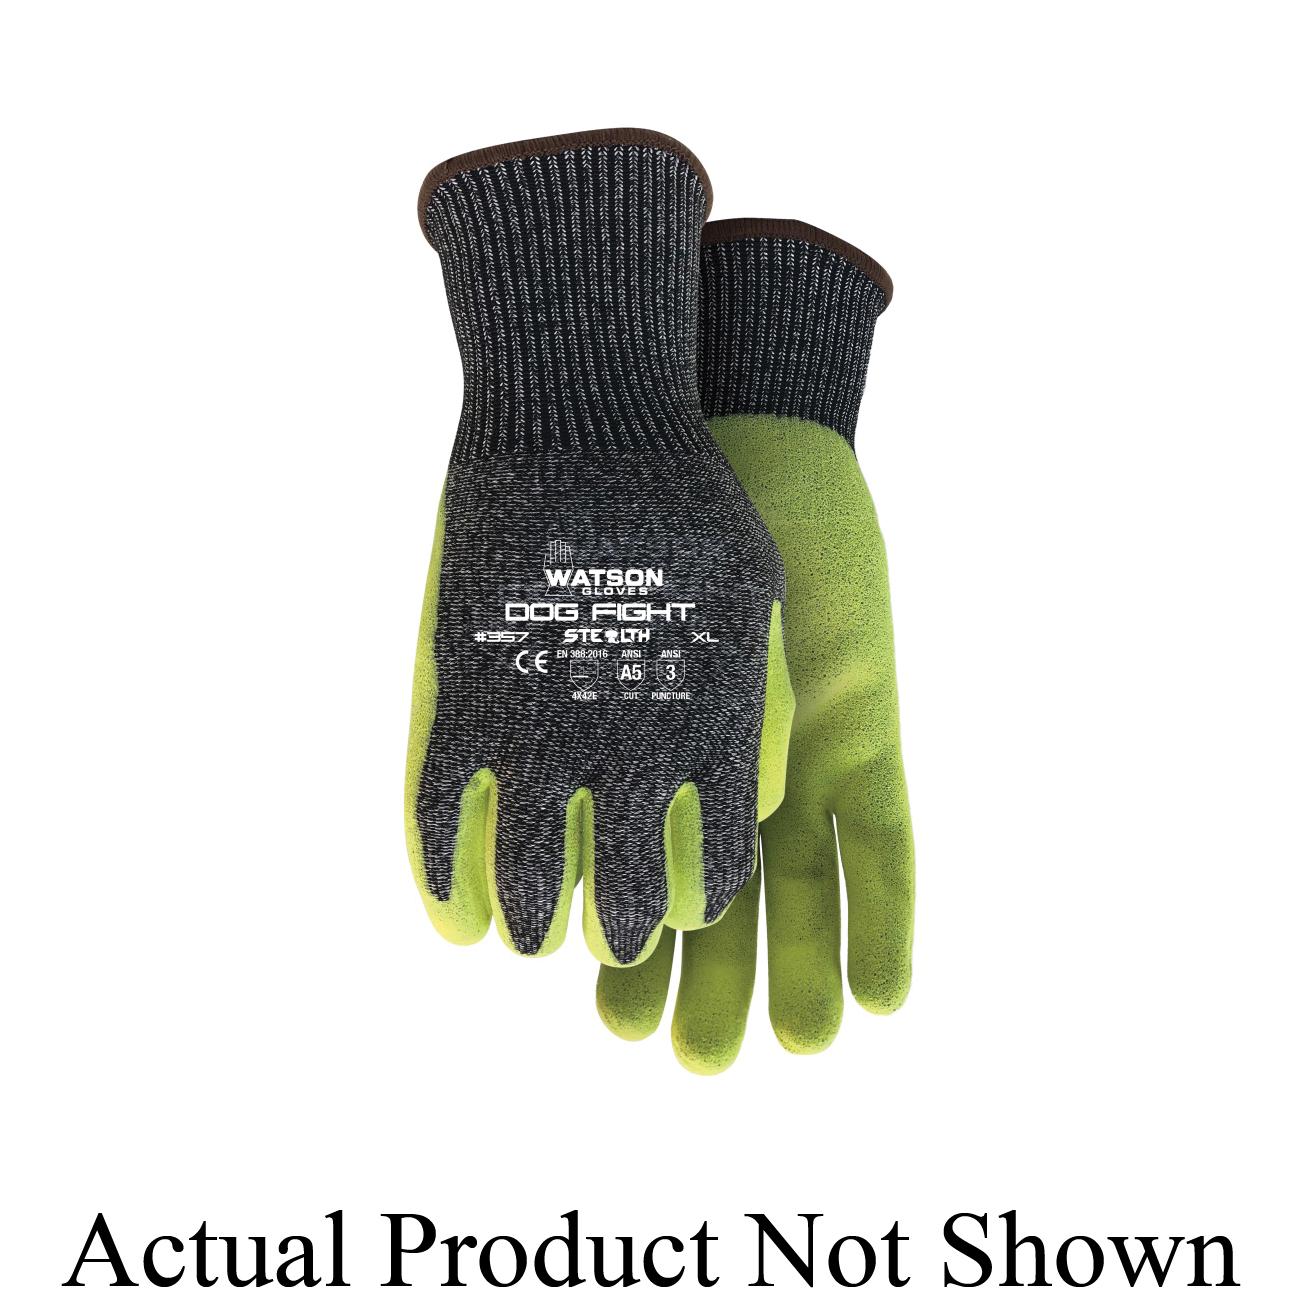 Stealth 357-L Dog Fight General Purpose Gloves, Coated, Open Back/Straight Thumb/Seamless Style, L, HPPE Shell Palm, Dyneema®/HPPE, Gray/Hi-Viz Yellow, Knit Wrist Cuff, Nitrile Coating, Resists: Abrasion, Blade Cut, Puncture and Tear